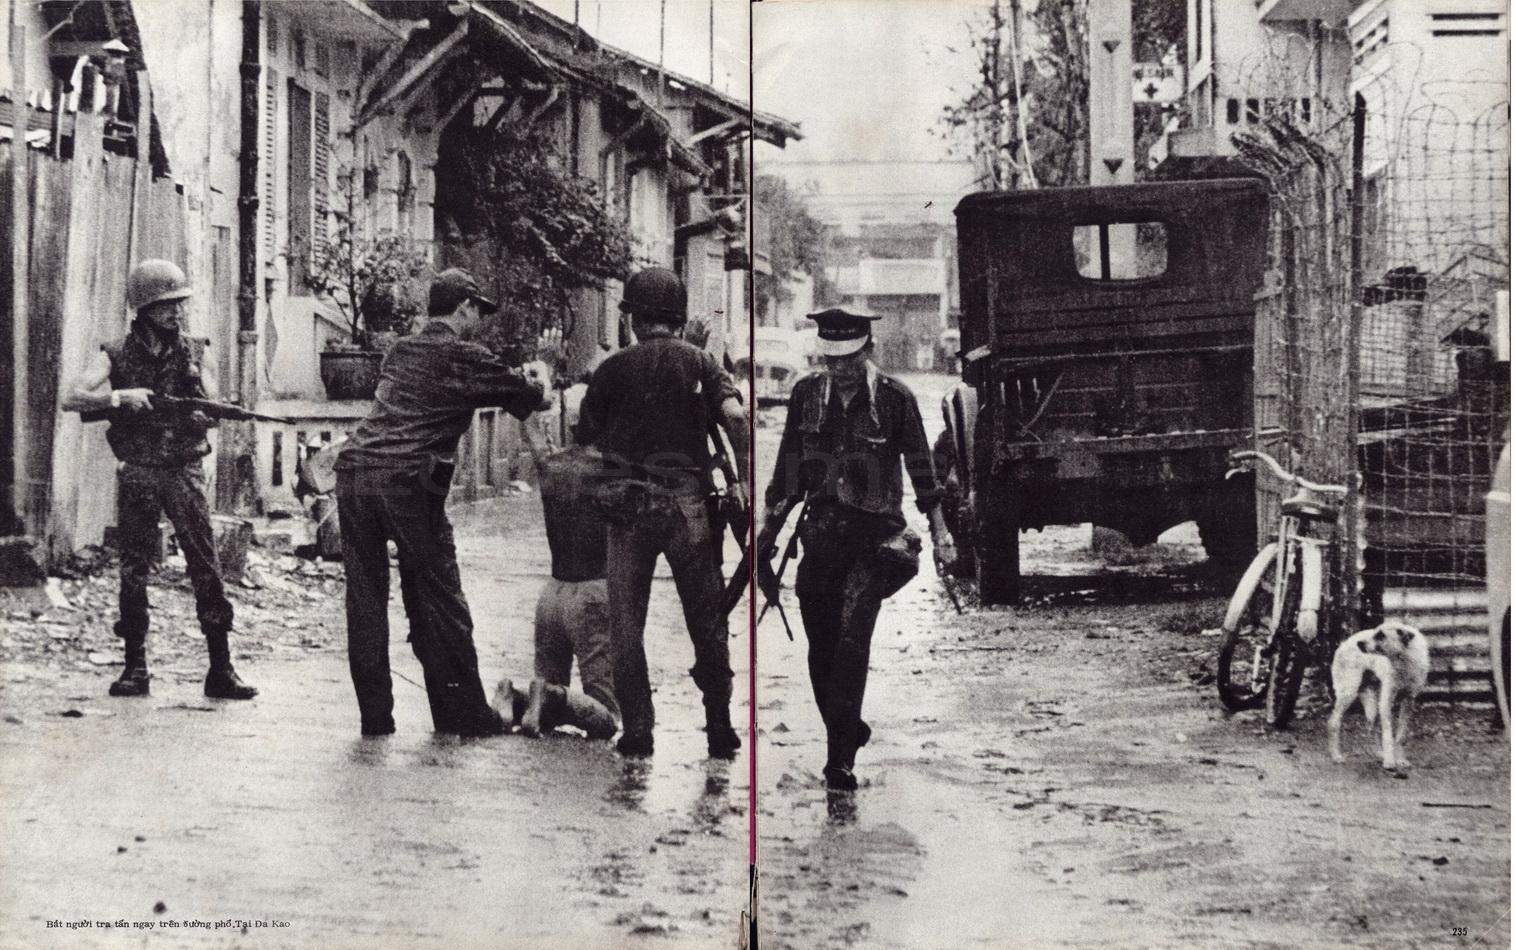 The historian studies of the tet offensive